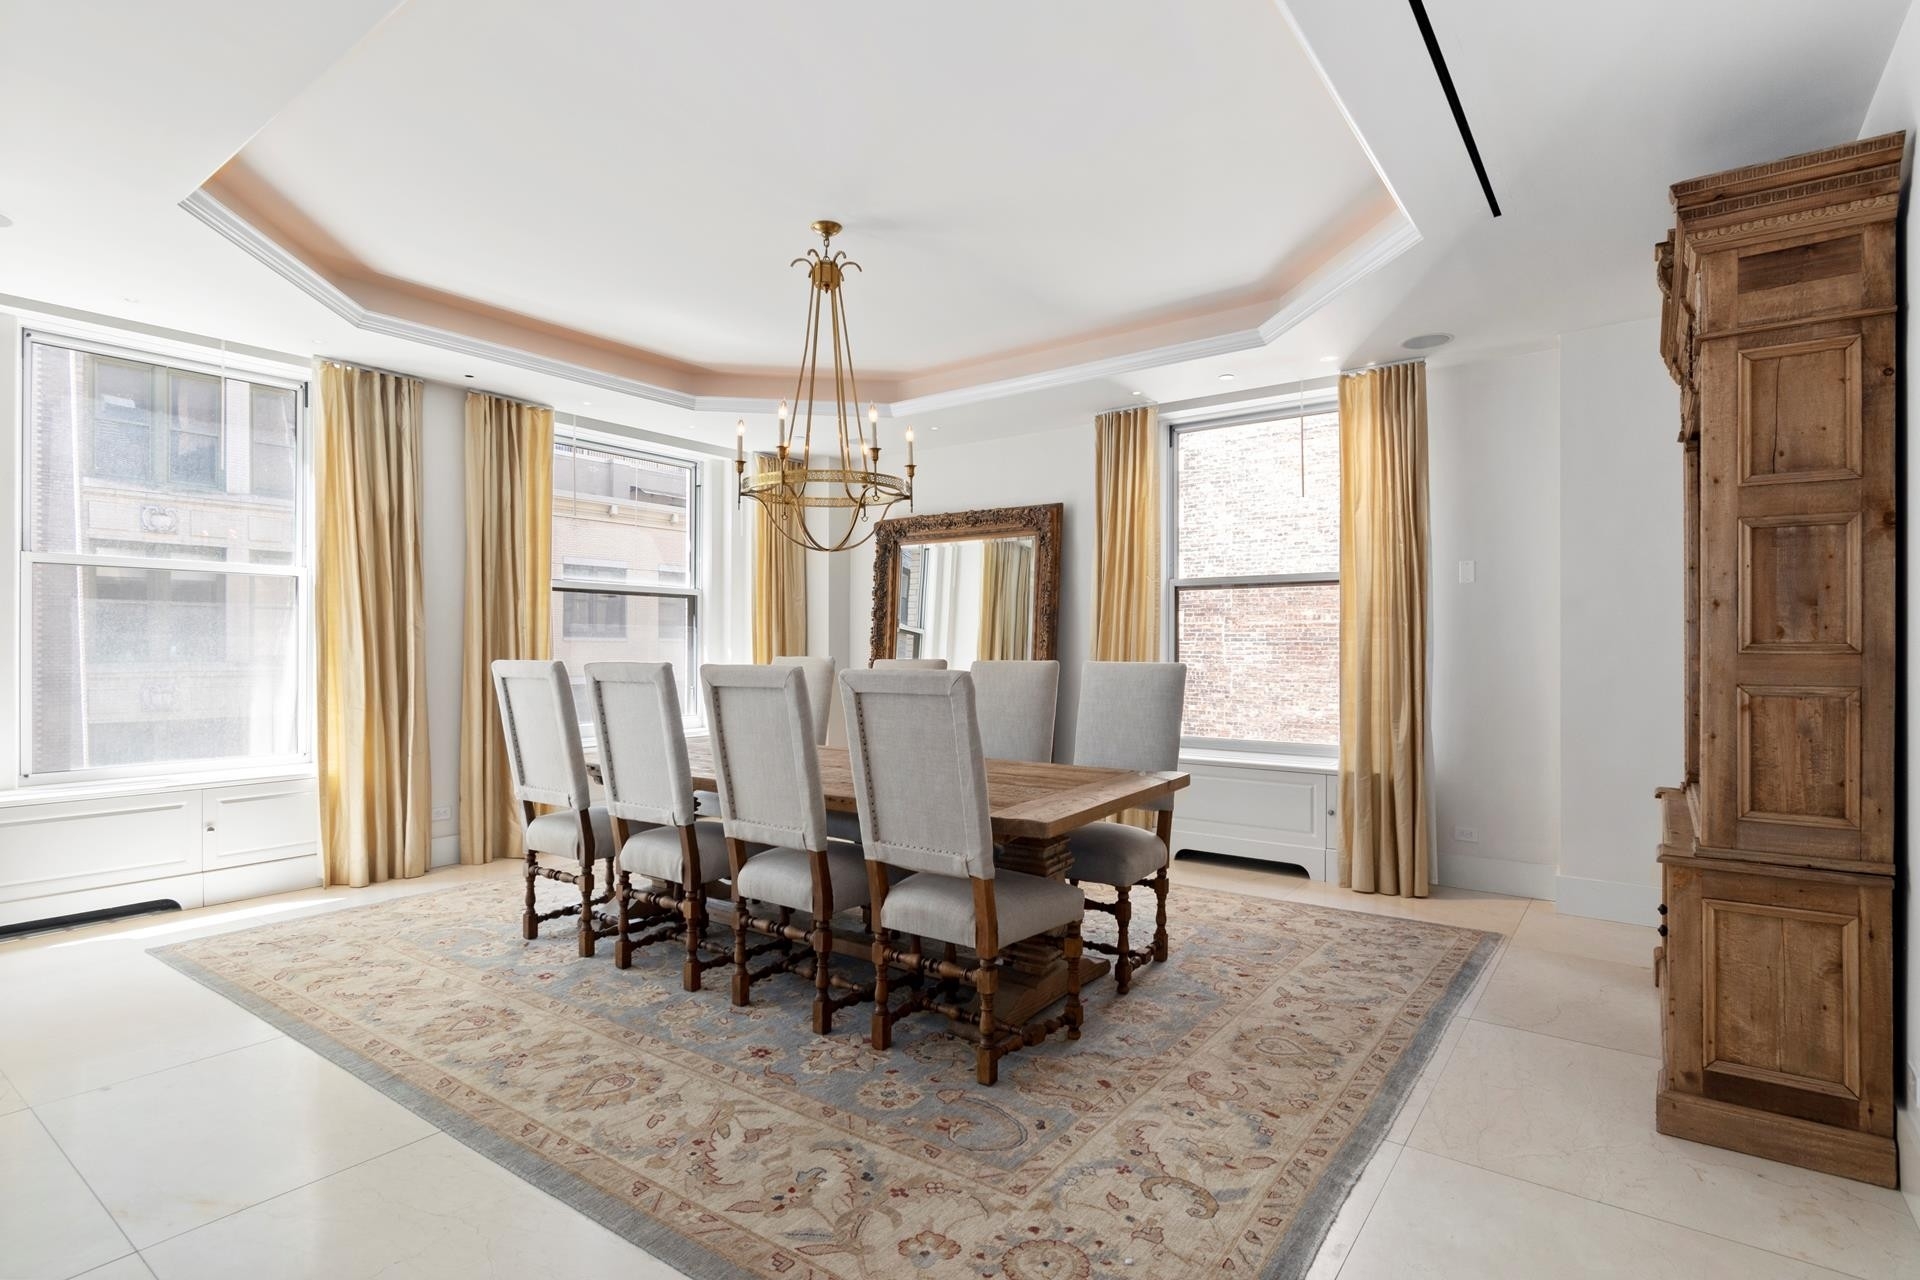 19. Co-op Properties for Sale at 17 W 17TH ST, 6 Union Square, New York, New York 10011